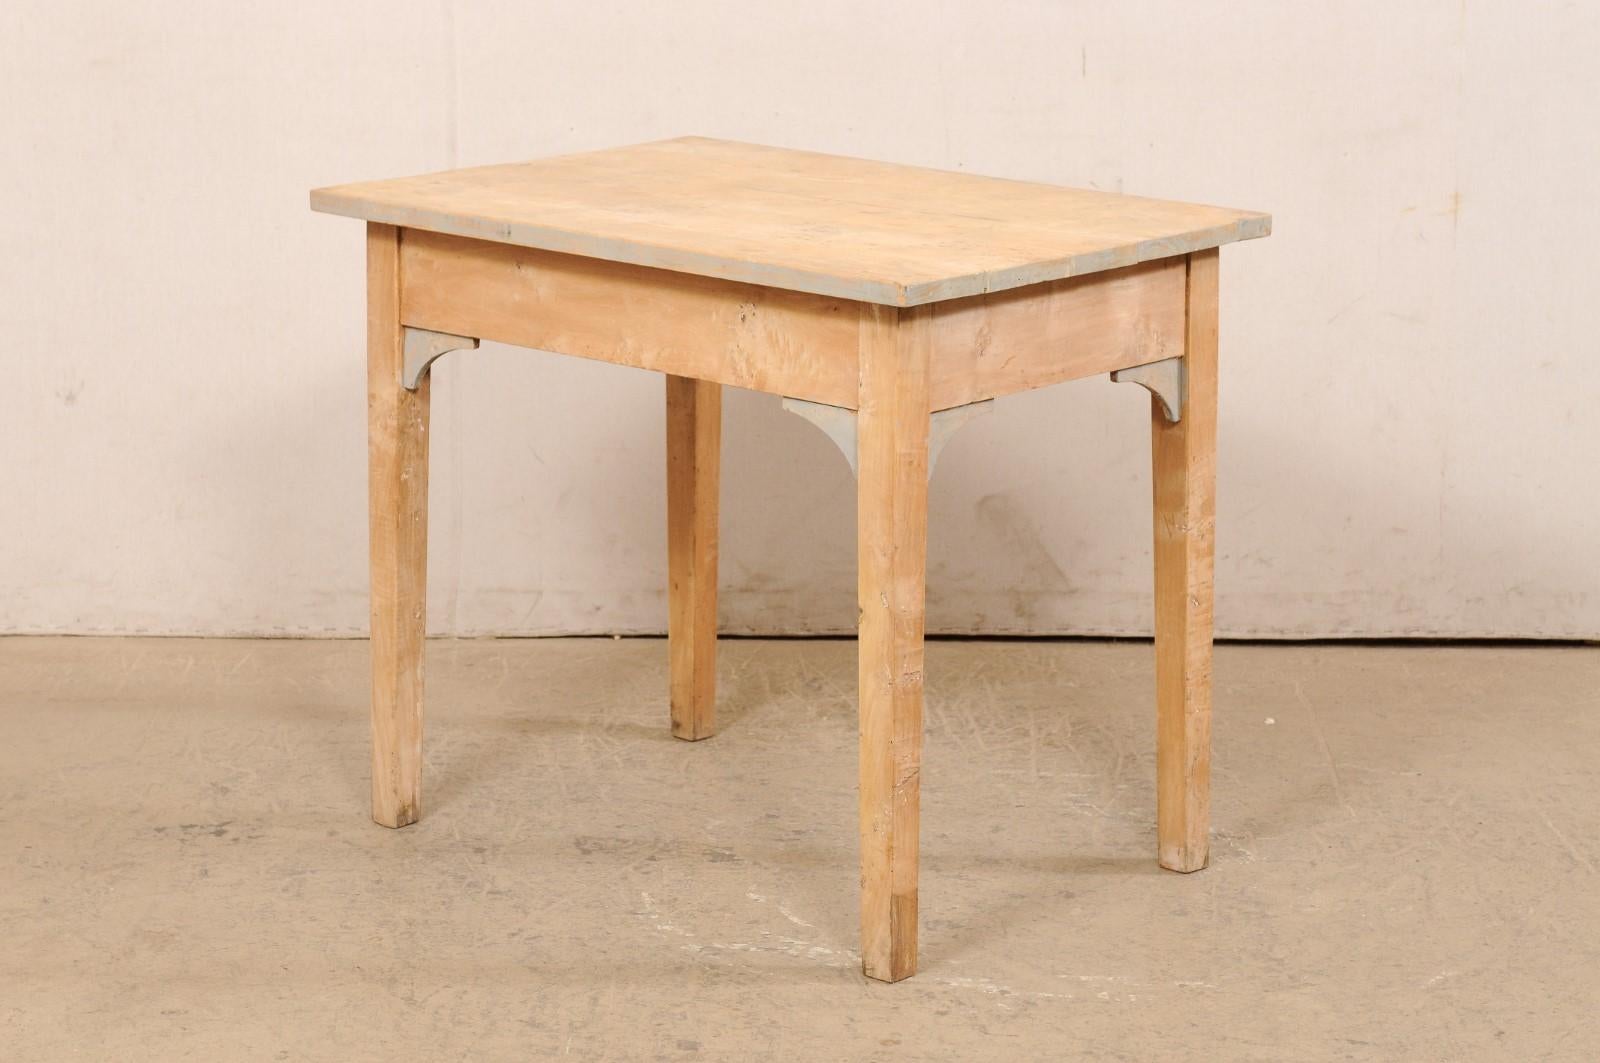 Swedish Curly Birch Wood Table, Early 20th C. For Sale 2